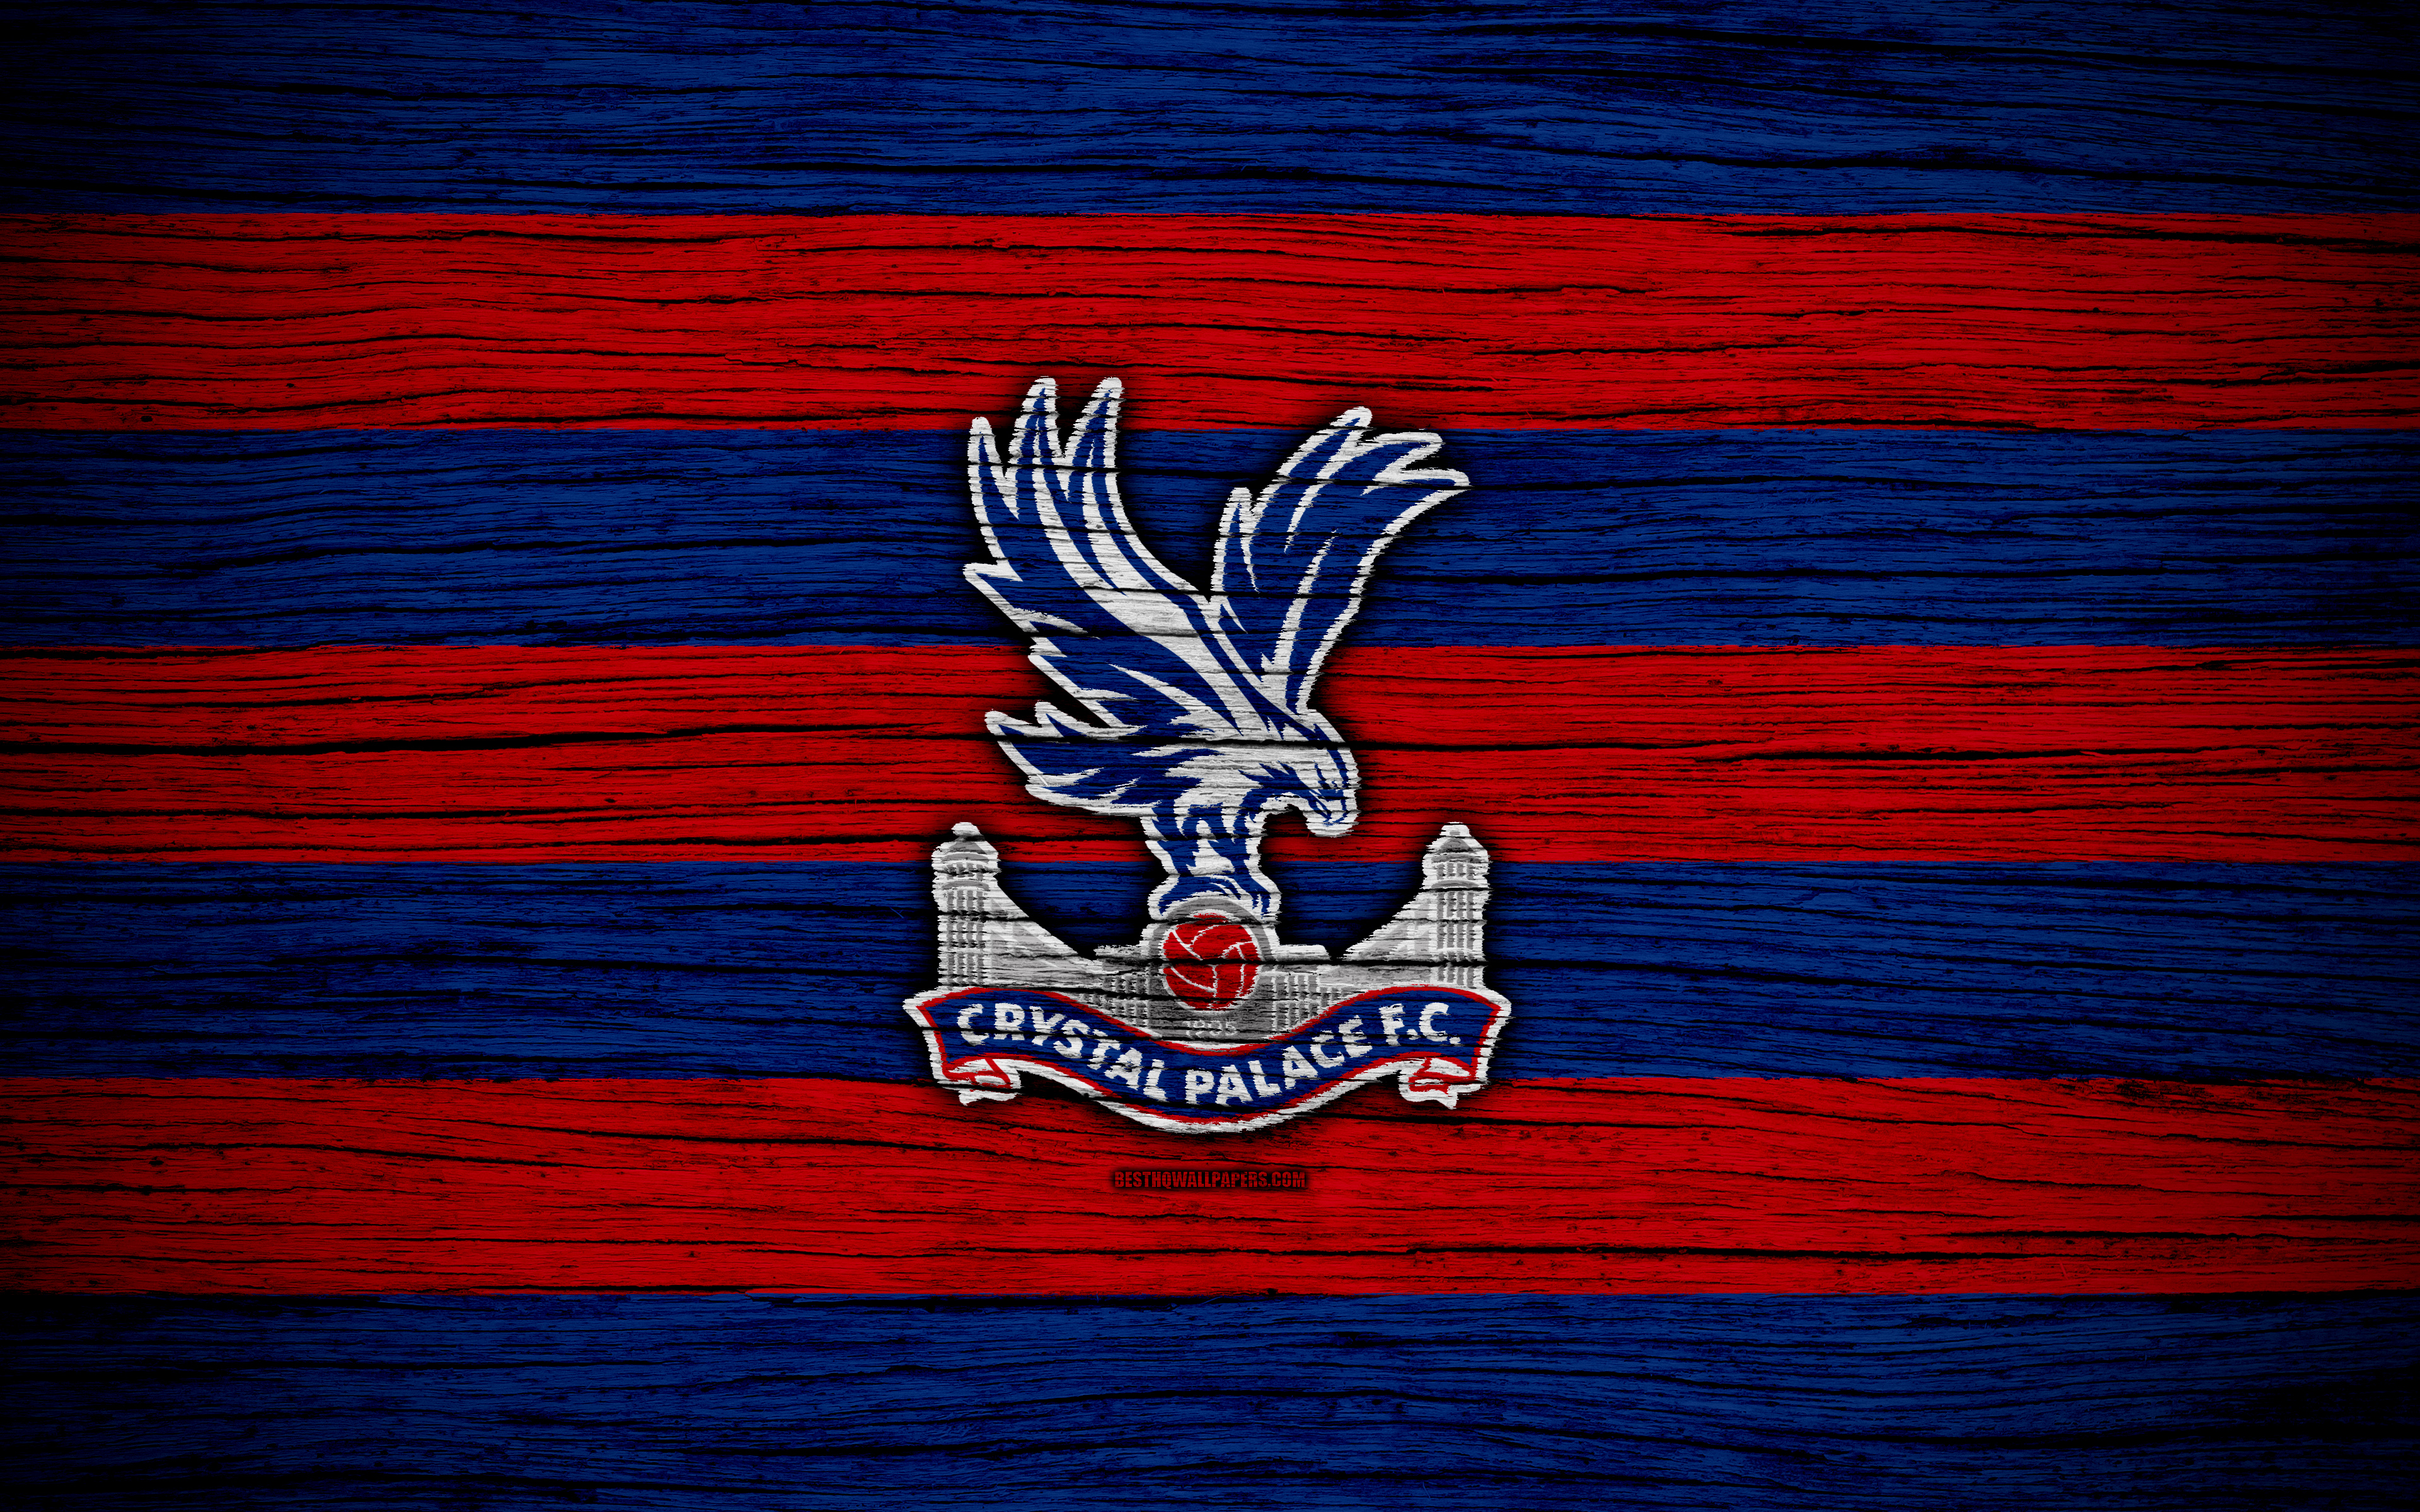 Download wallpaper Crystal Palace, 4k, Premier League, logo, England, wooden texture, FC Crystal Palace, soccer, football, Crystal Palace FC for desktop with resolution 3840x2400. High Quality HD picture wallpaper